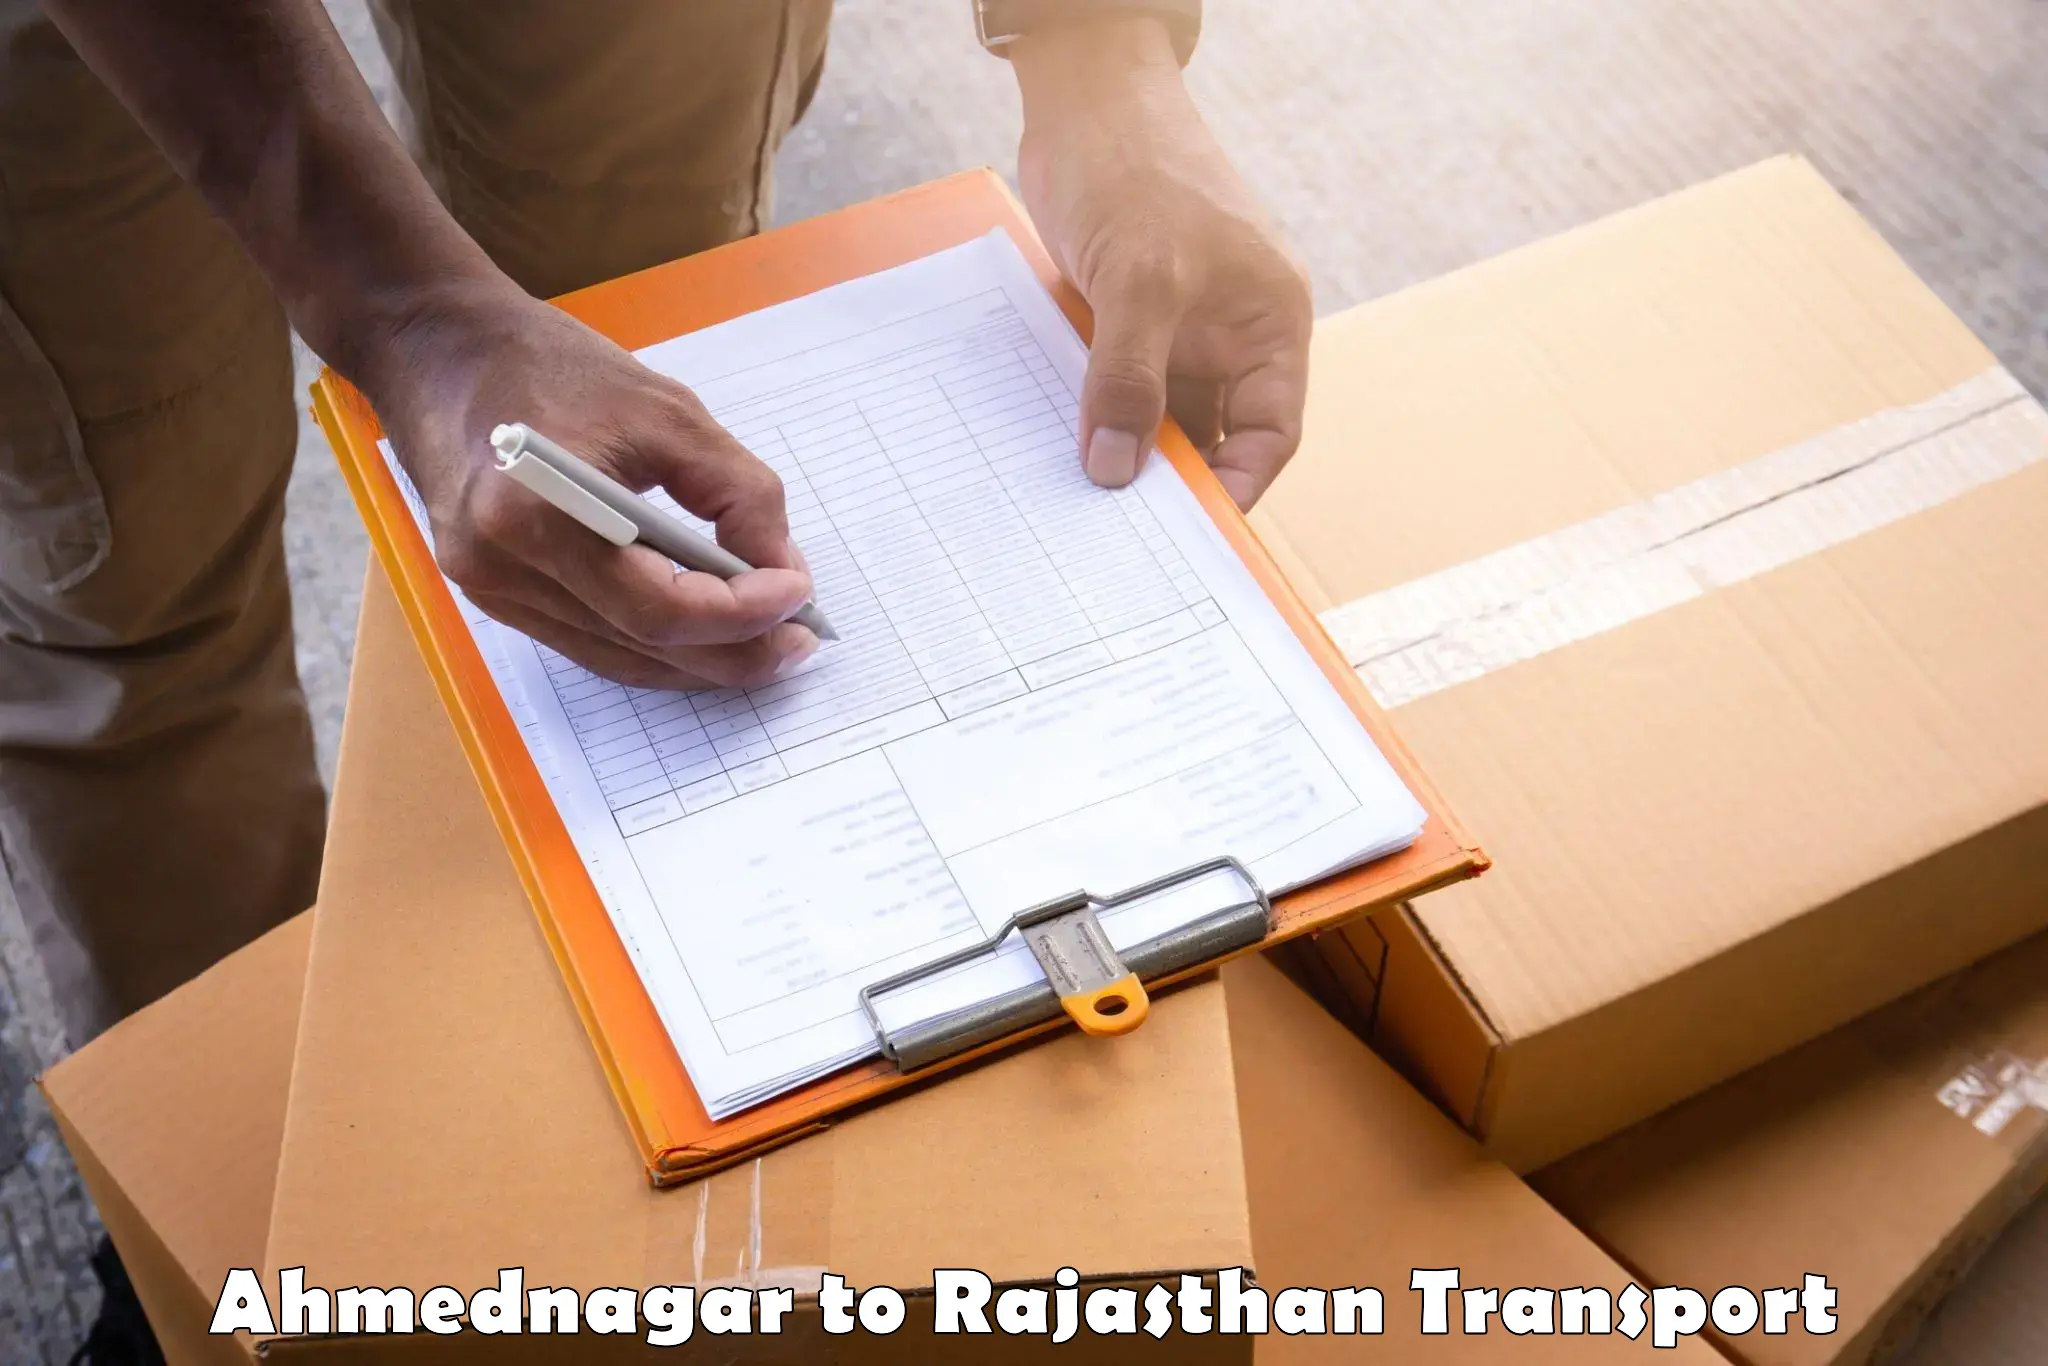 Goods delivery service Ahmednagar to Jaipur